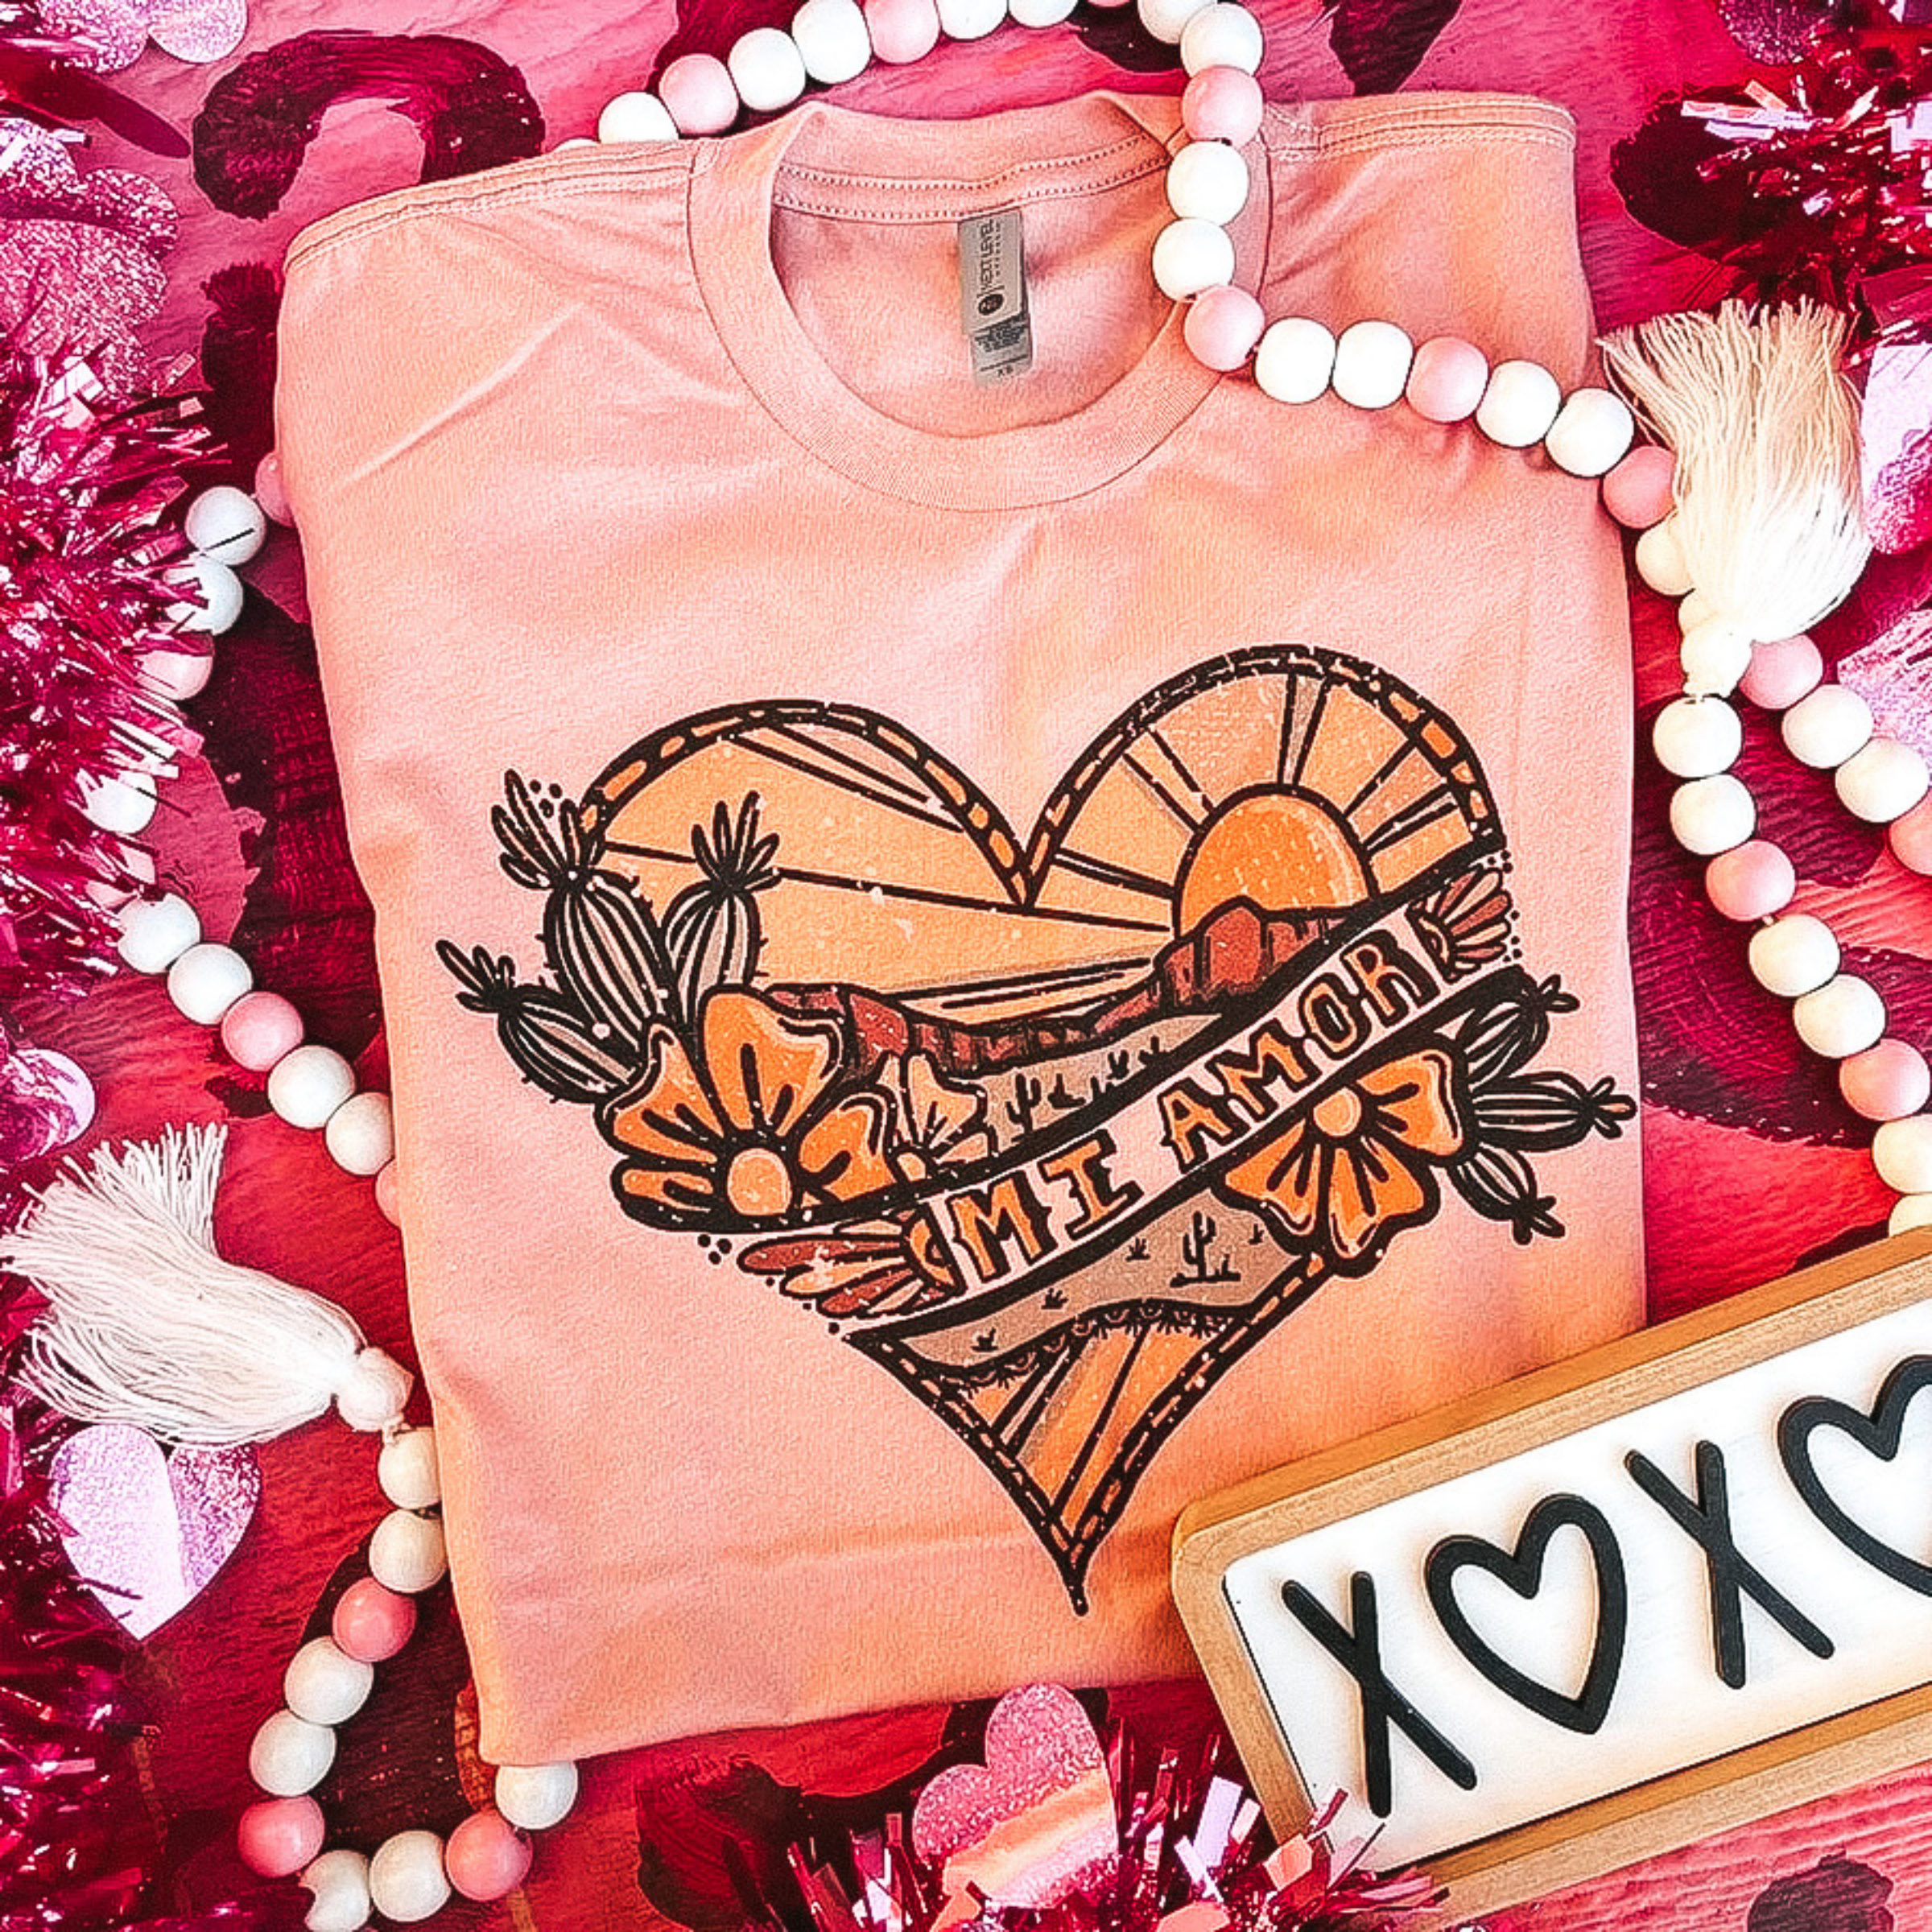 A light coral tee shirt with a desert heart graphic. Pictured on a pink background with beads, hearts, and tinsel.